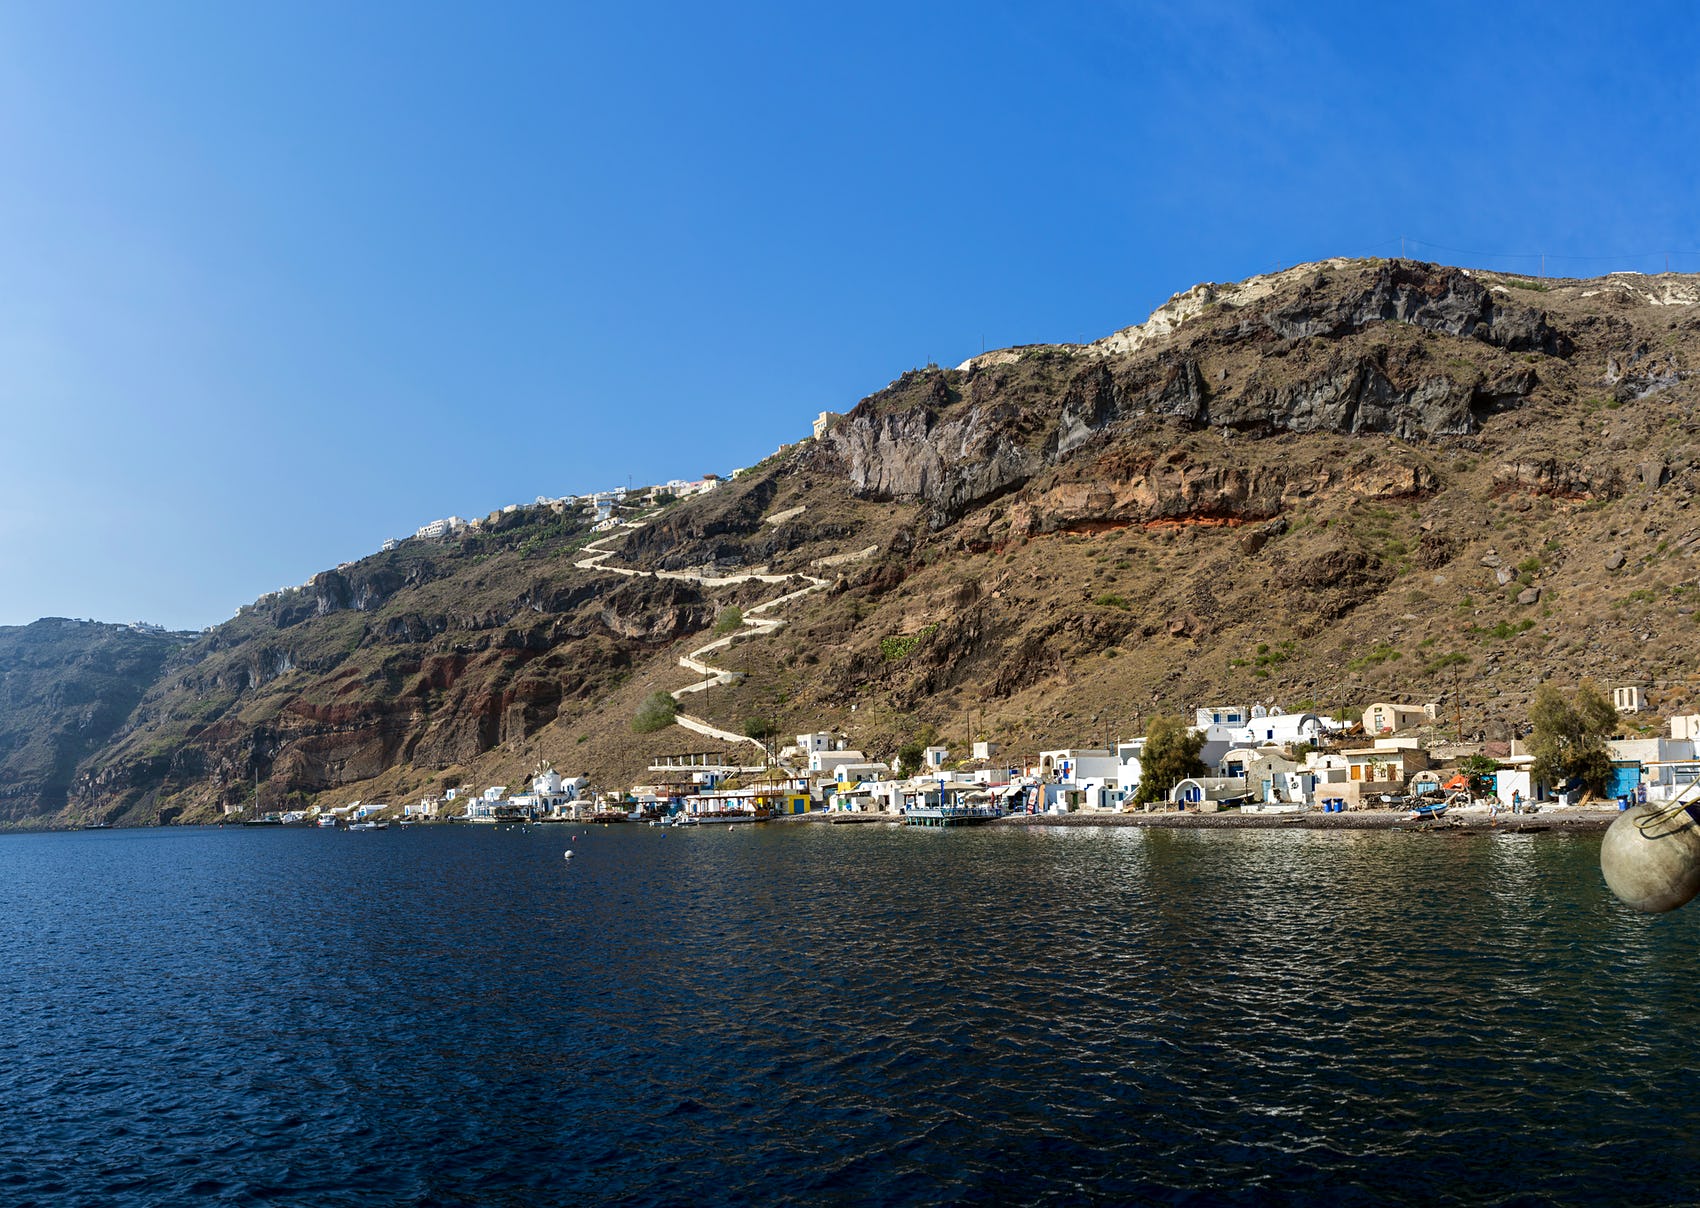 Paradise found: the best places to visit on Santorini